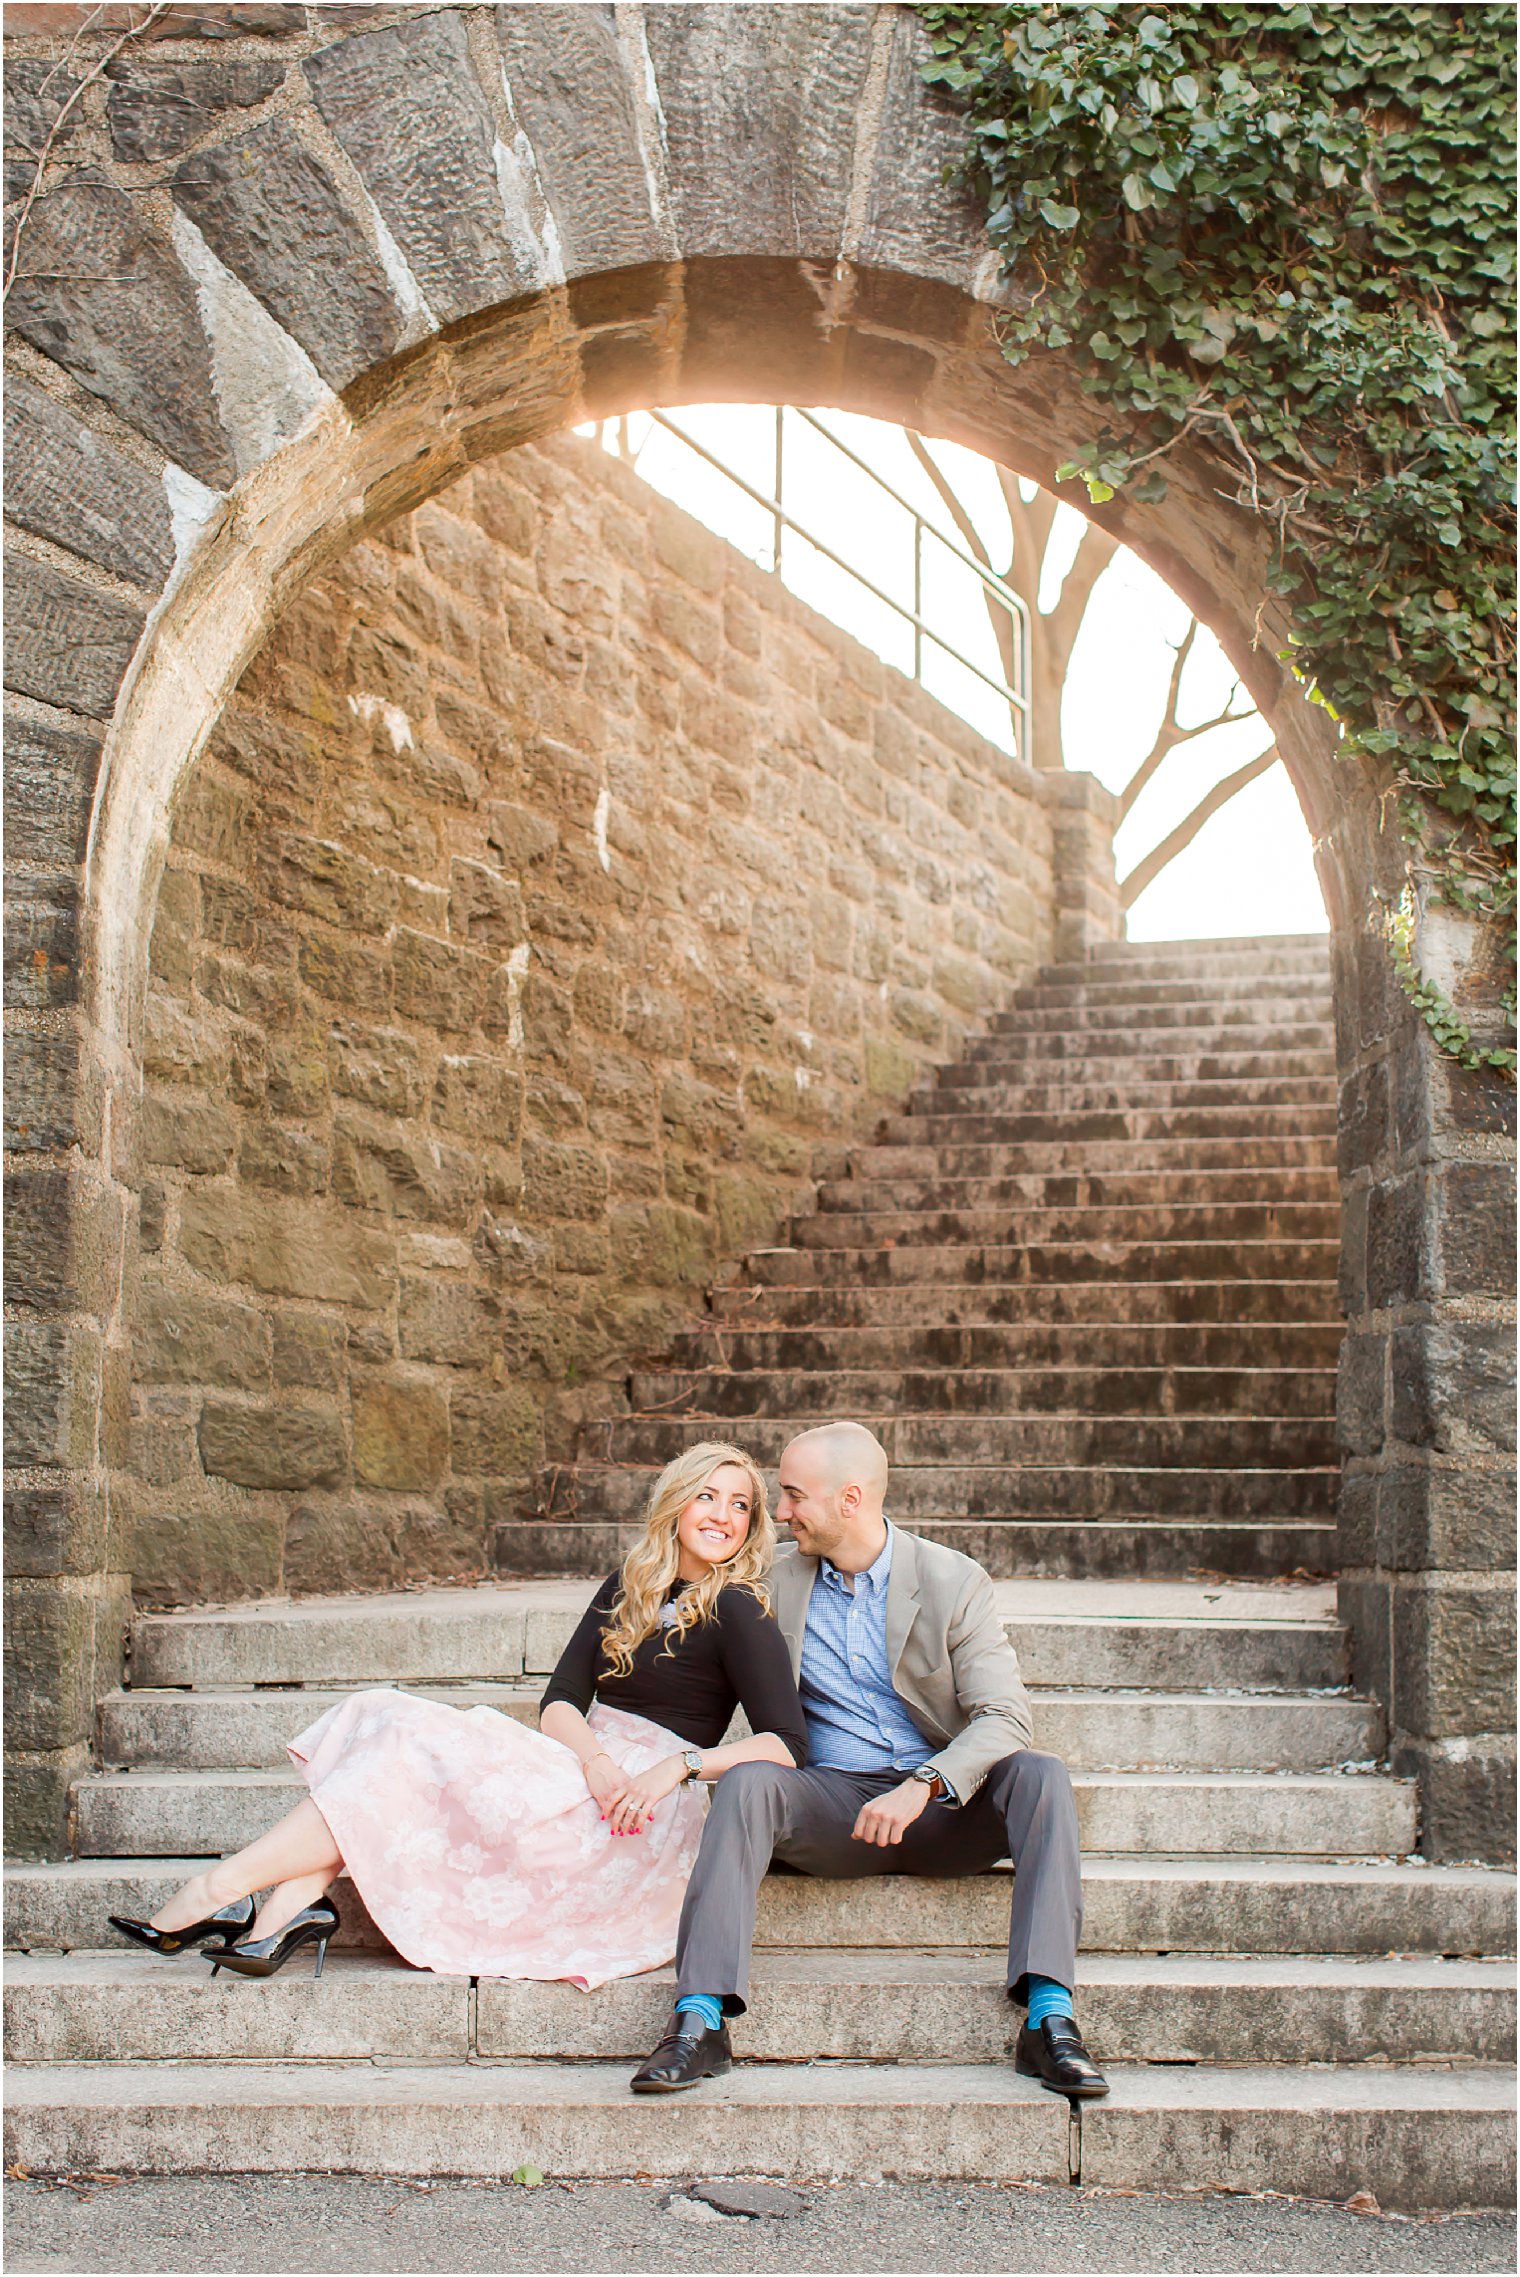 Unique locations for engagement photos in NYC